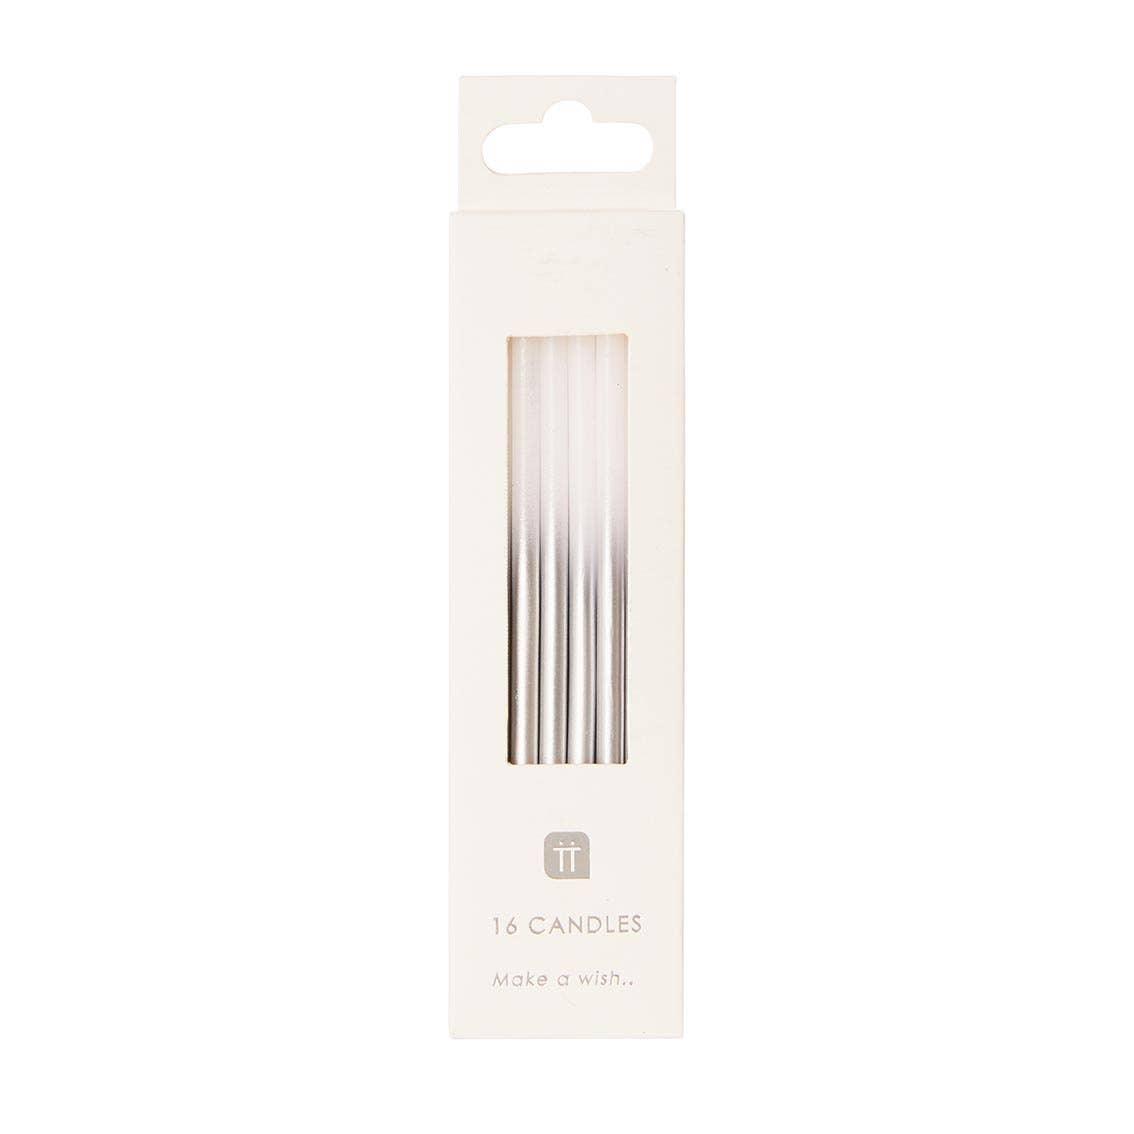 White and Silver Birthday Candles - 16 Pack - The Silver Dahlia